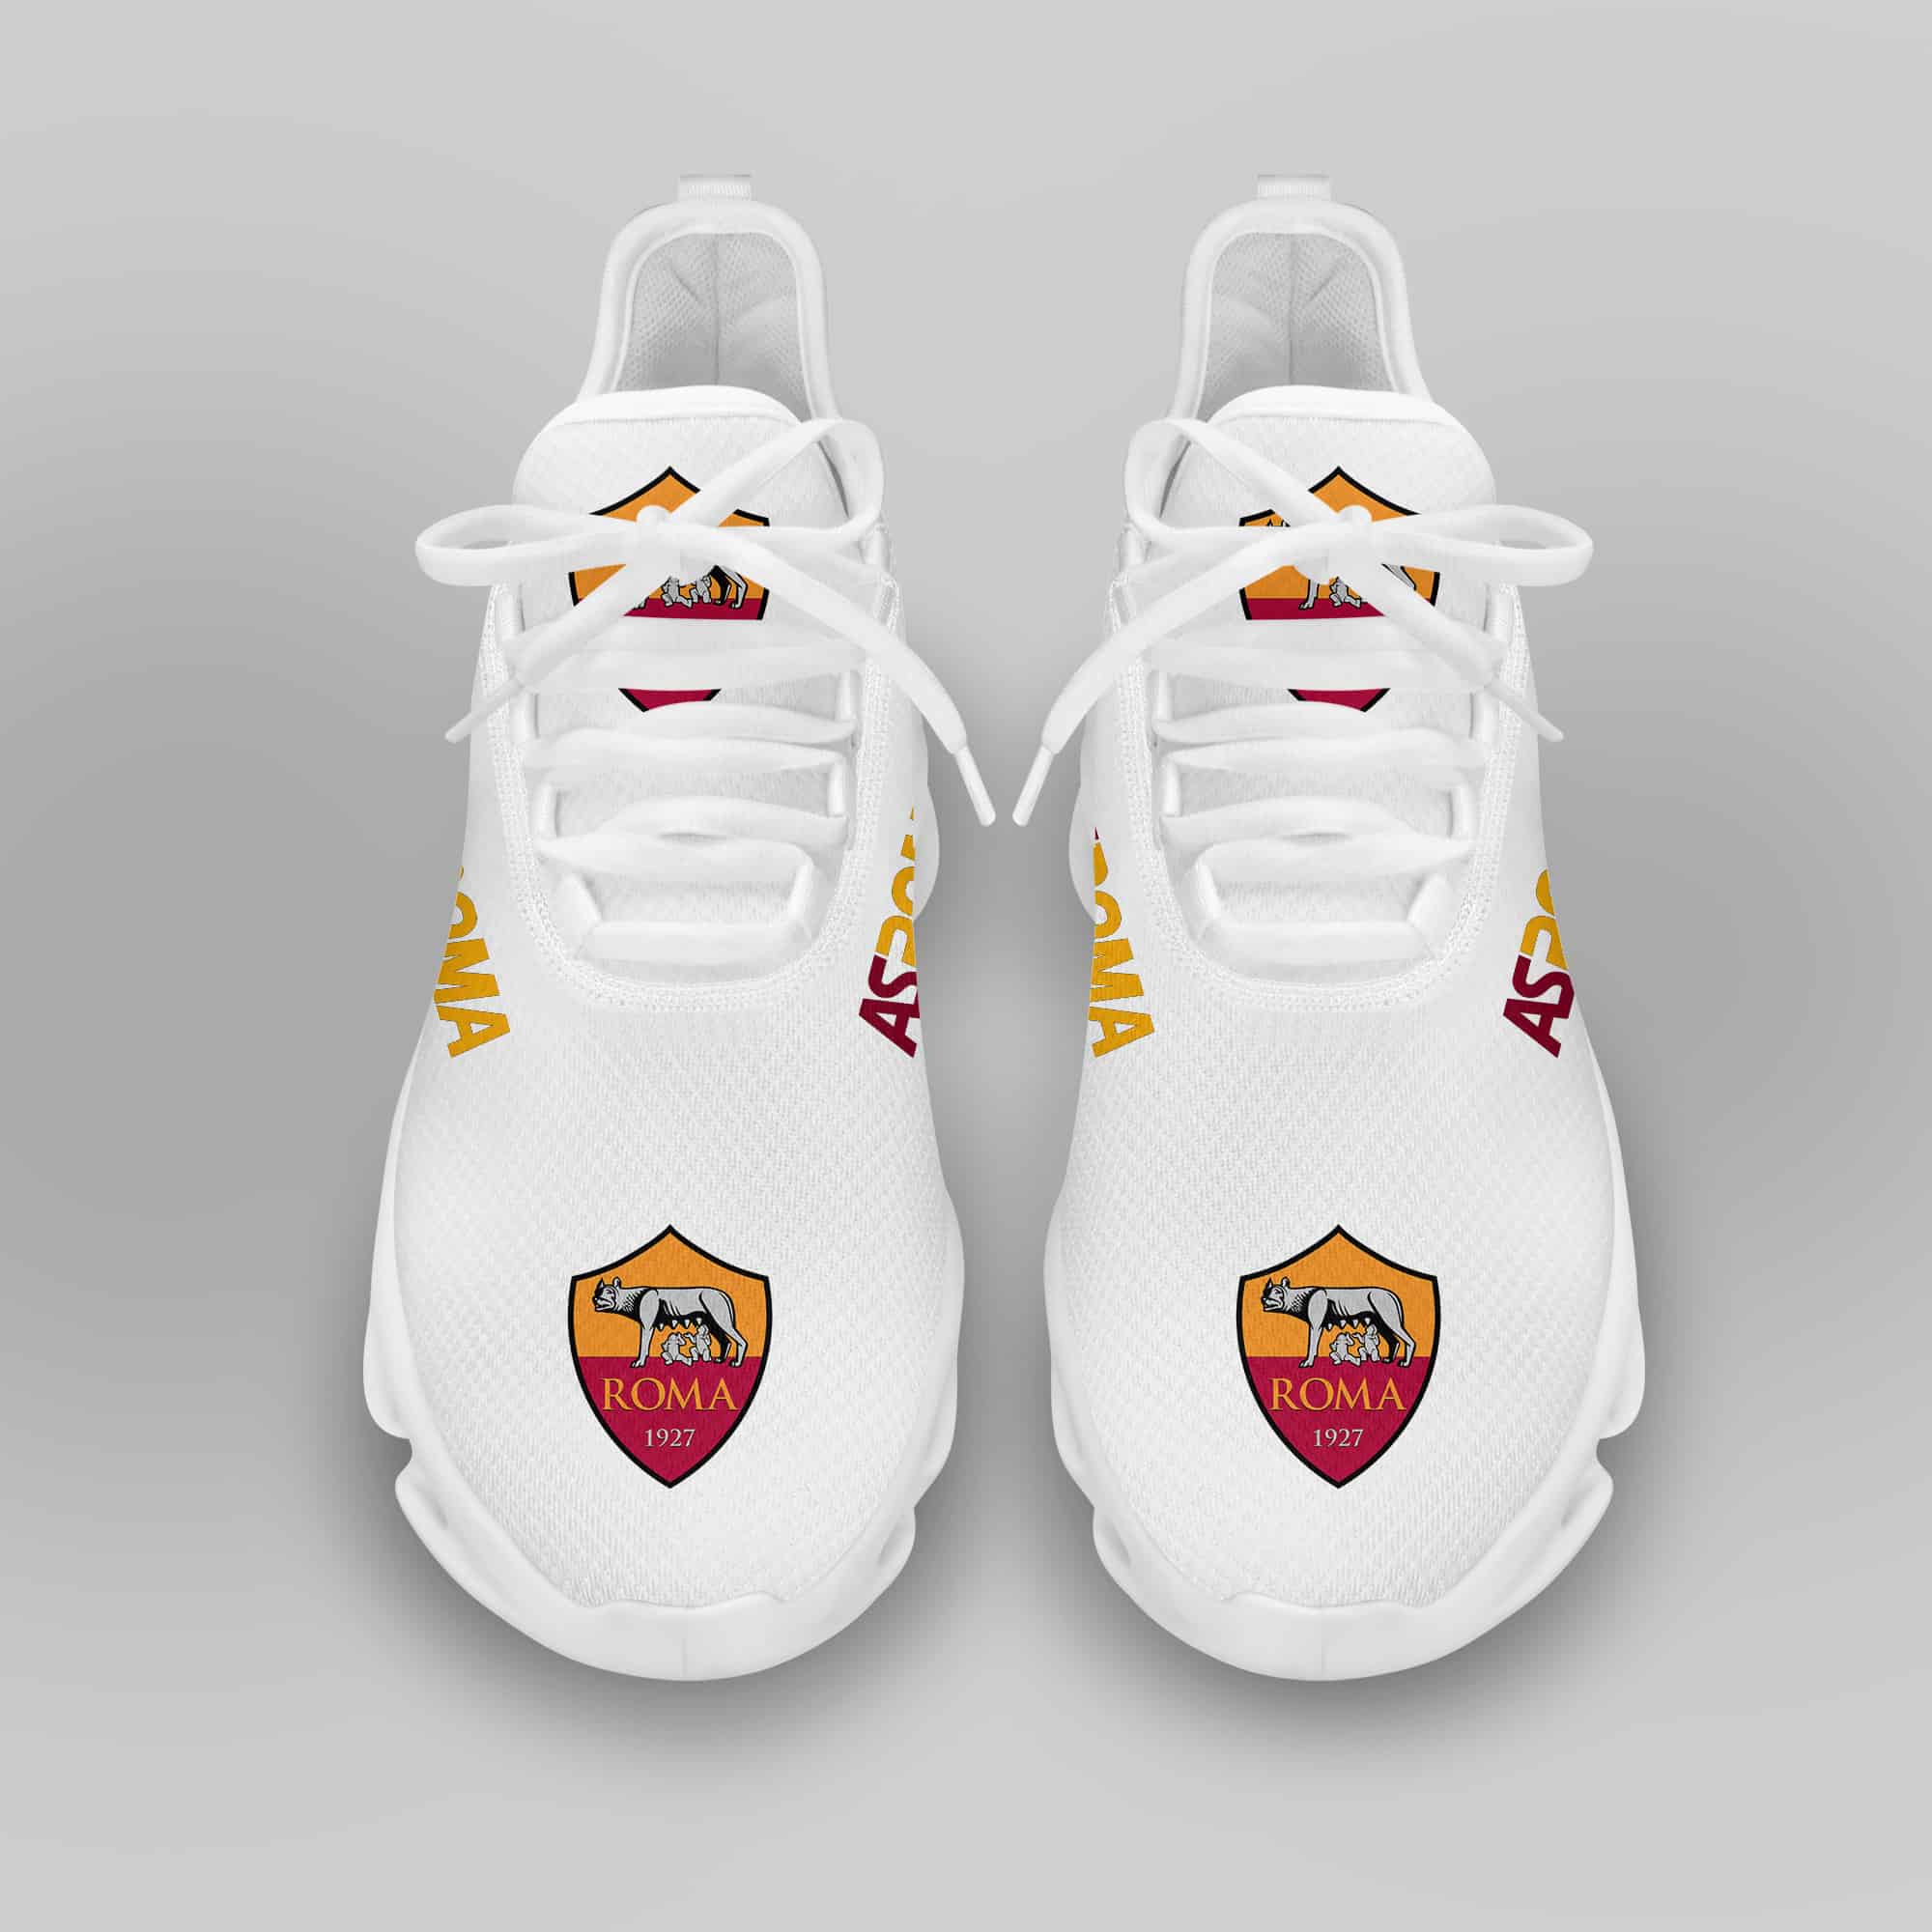 As Roma Running Shoes Max Soul Shoes Sneakers Ver 27 3